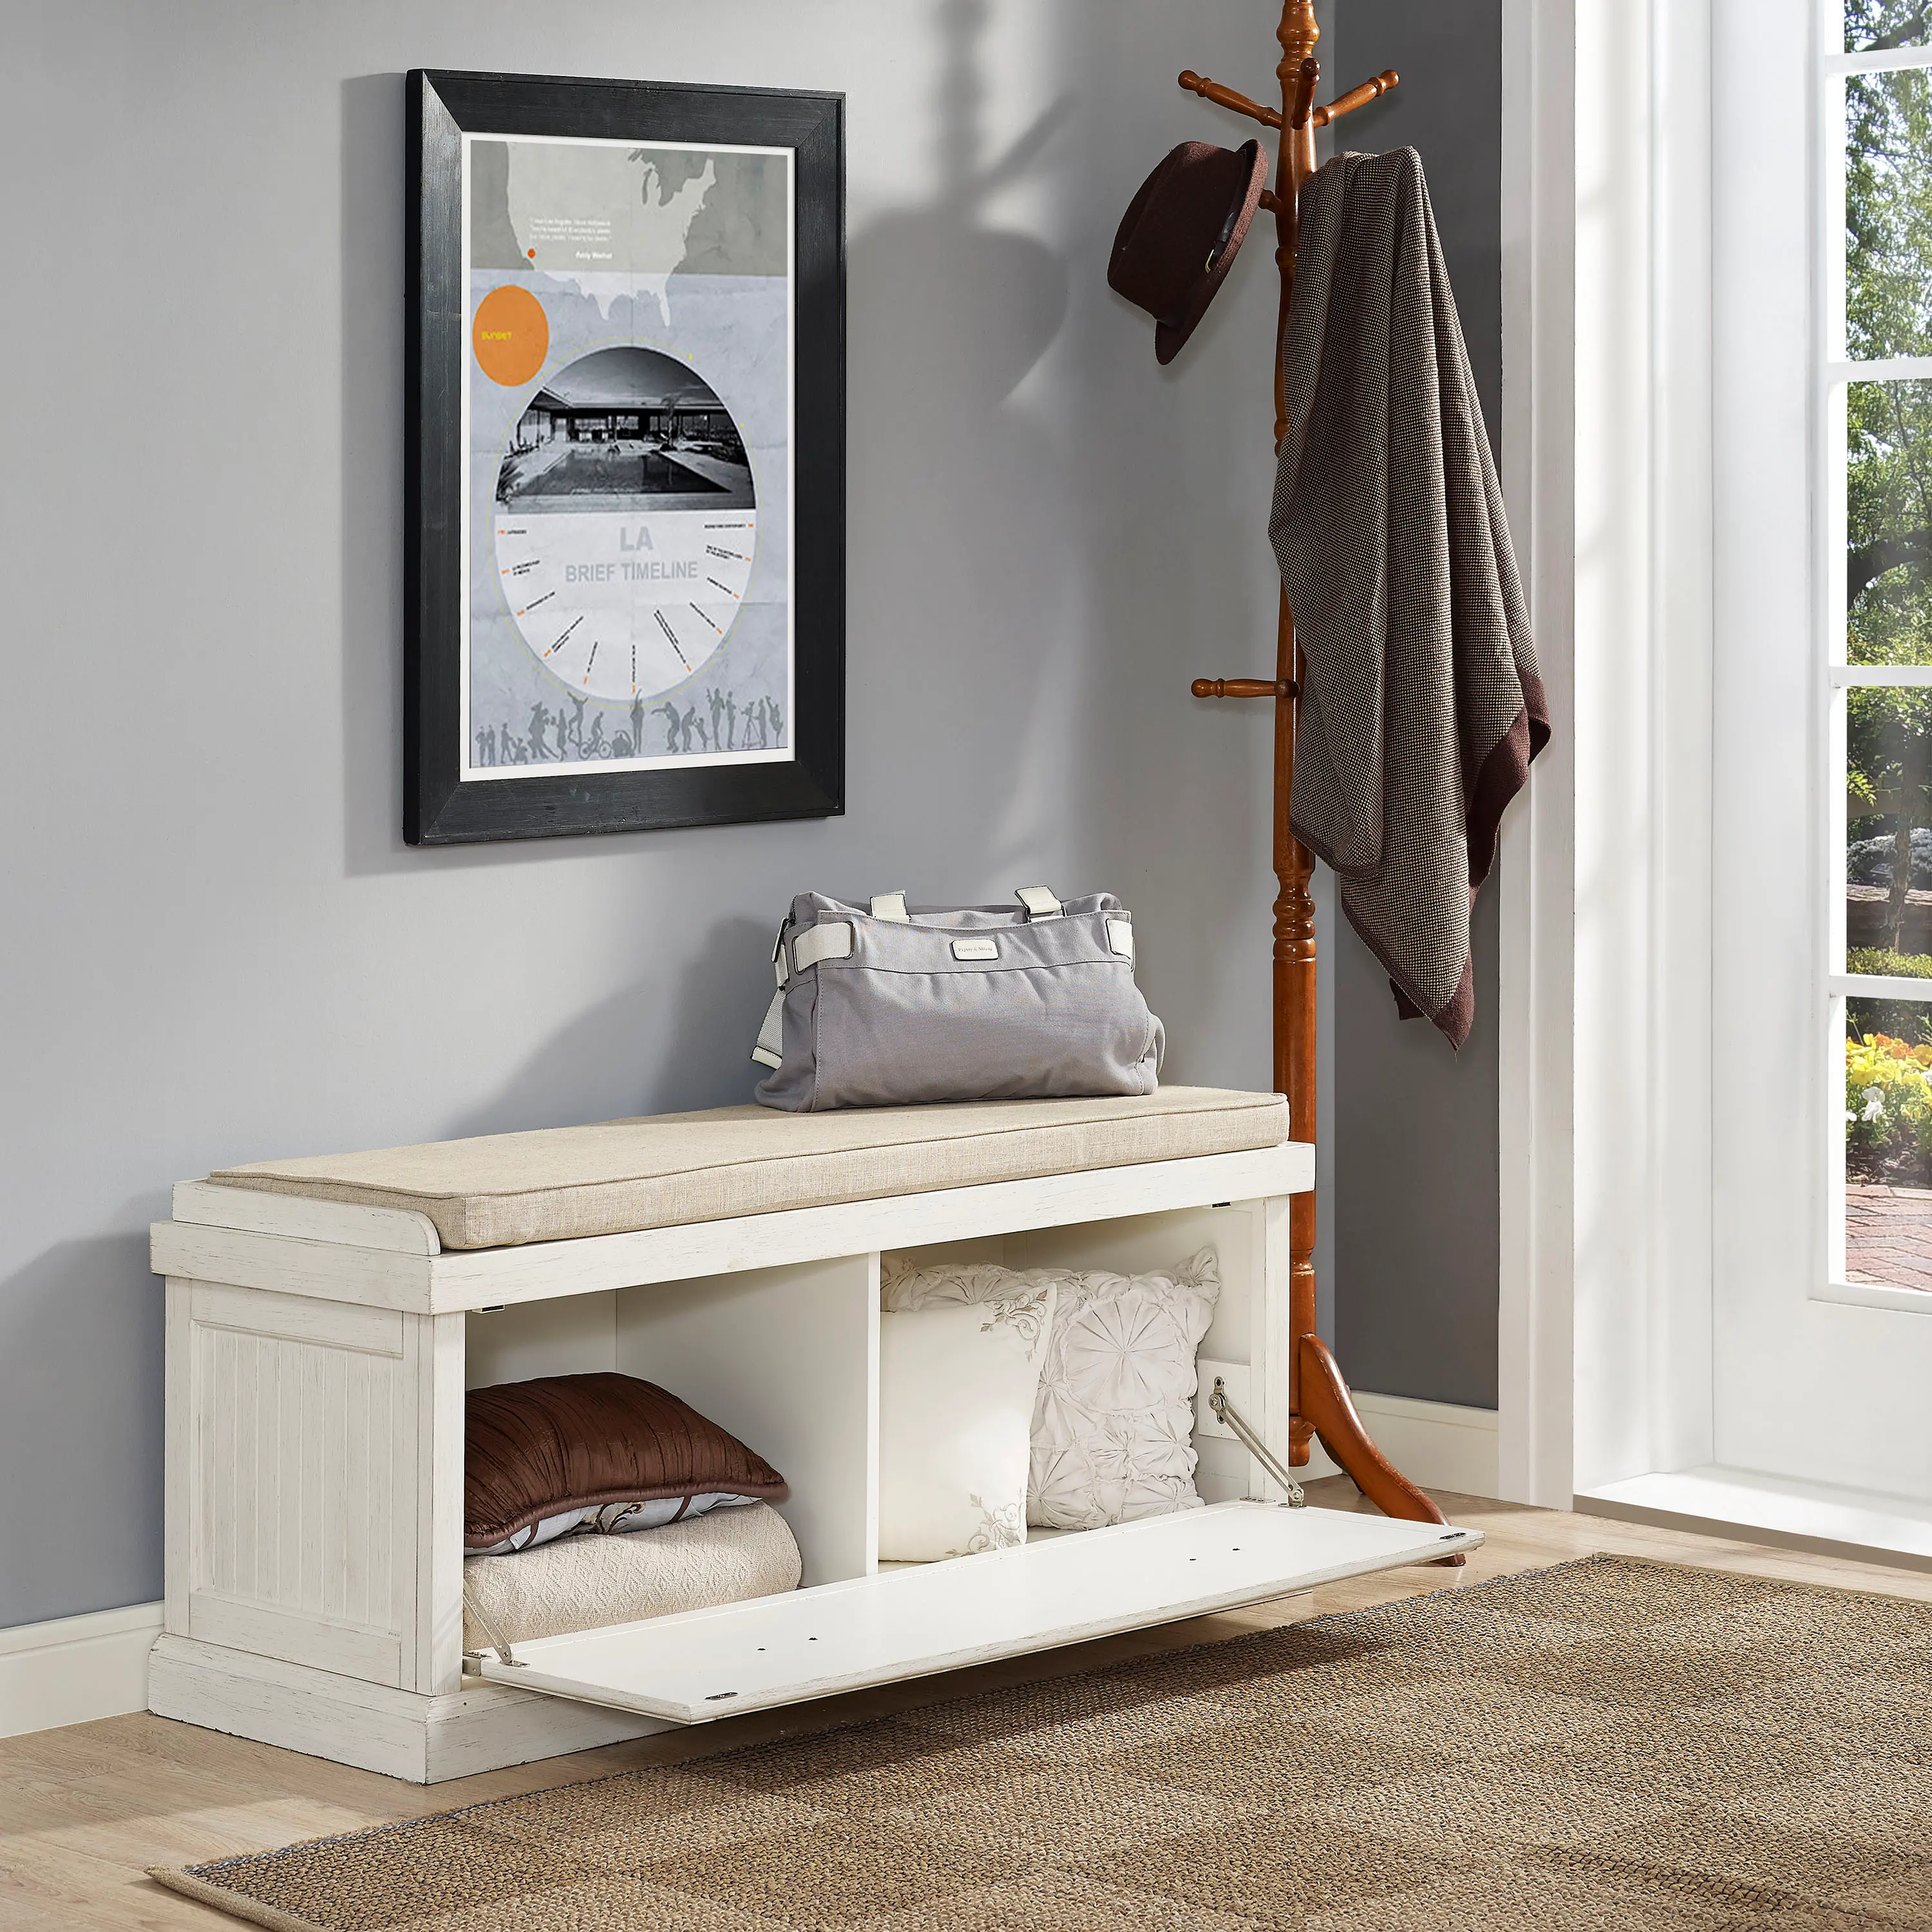 CF6011-WH Seaside Distressed White Entryway Bench sku CF6011-WH